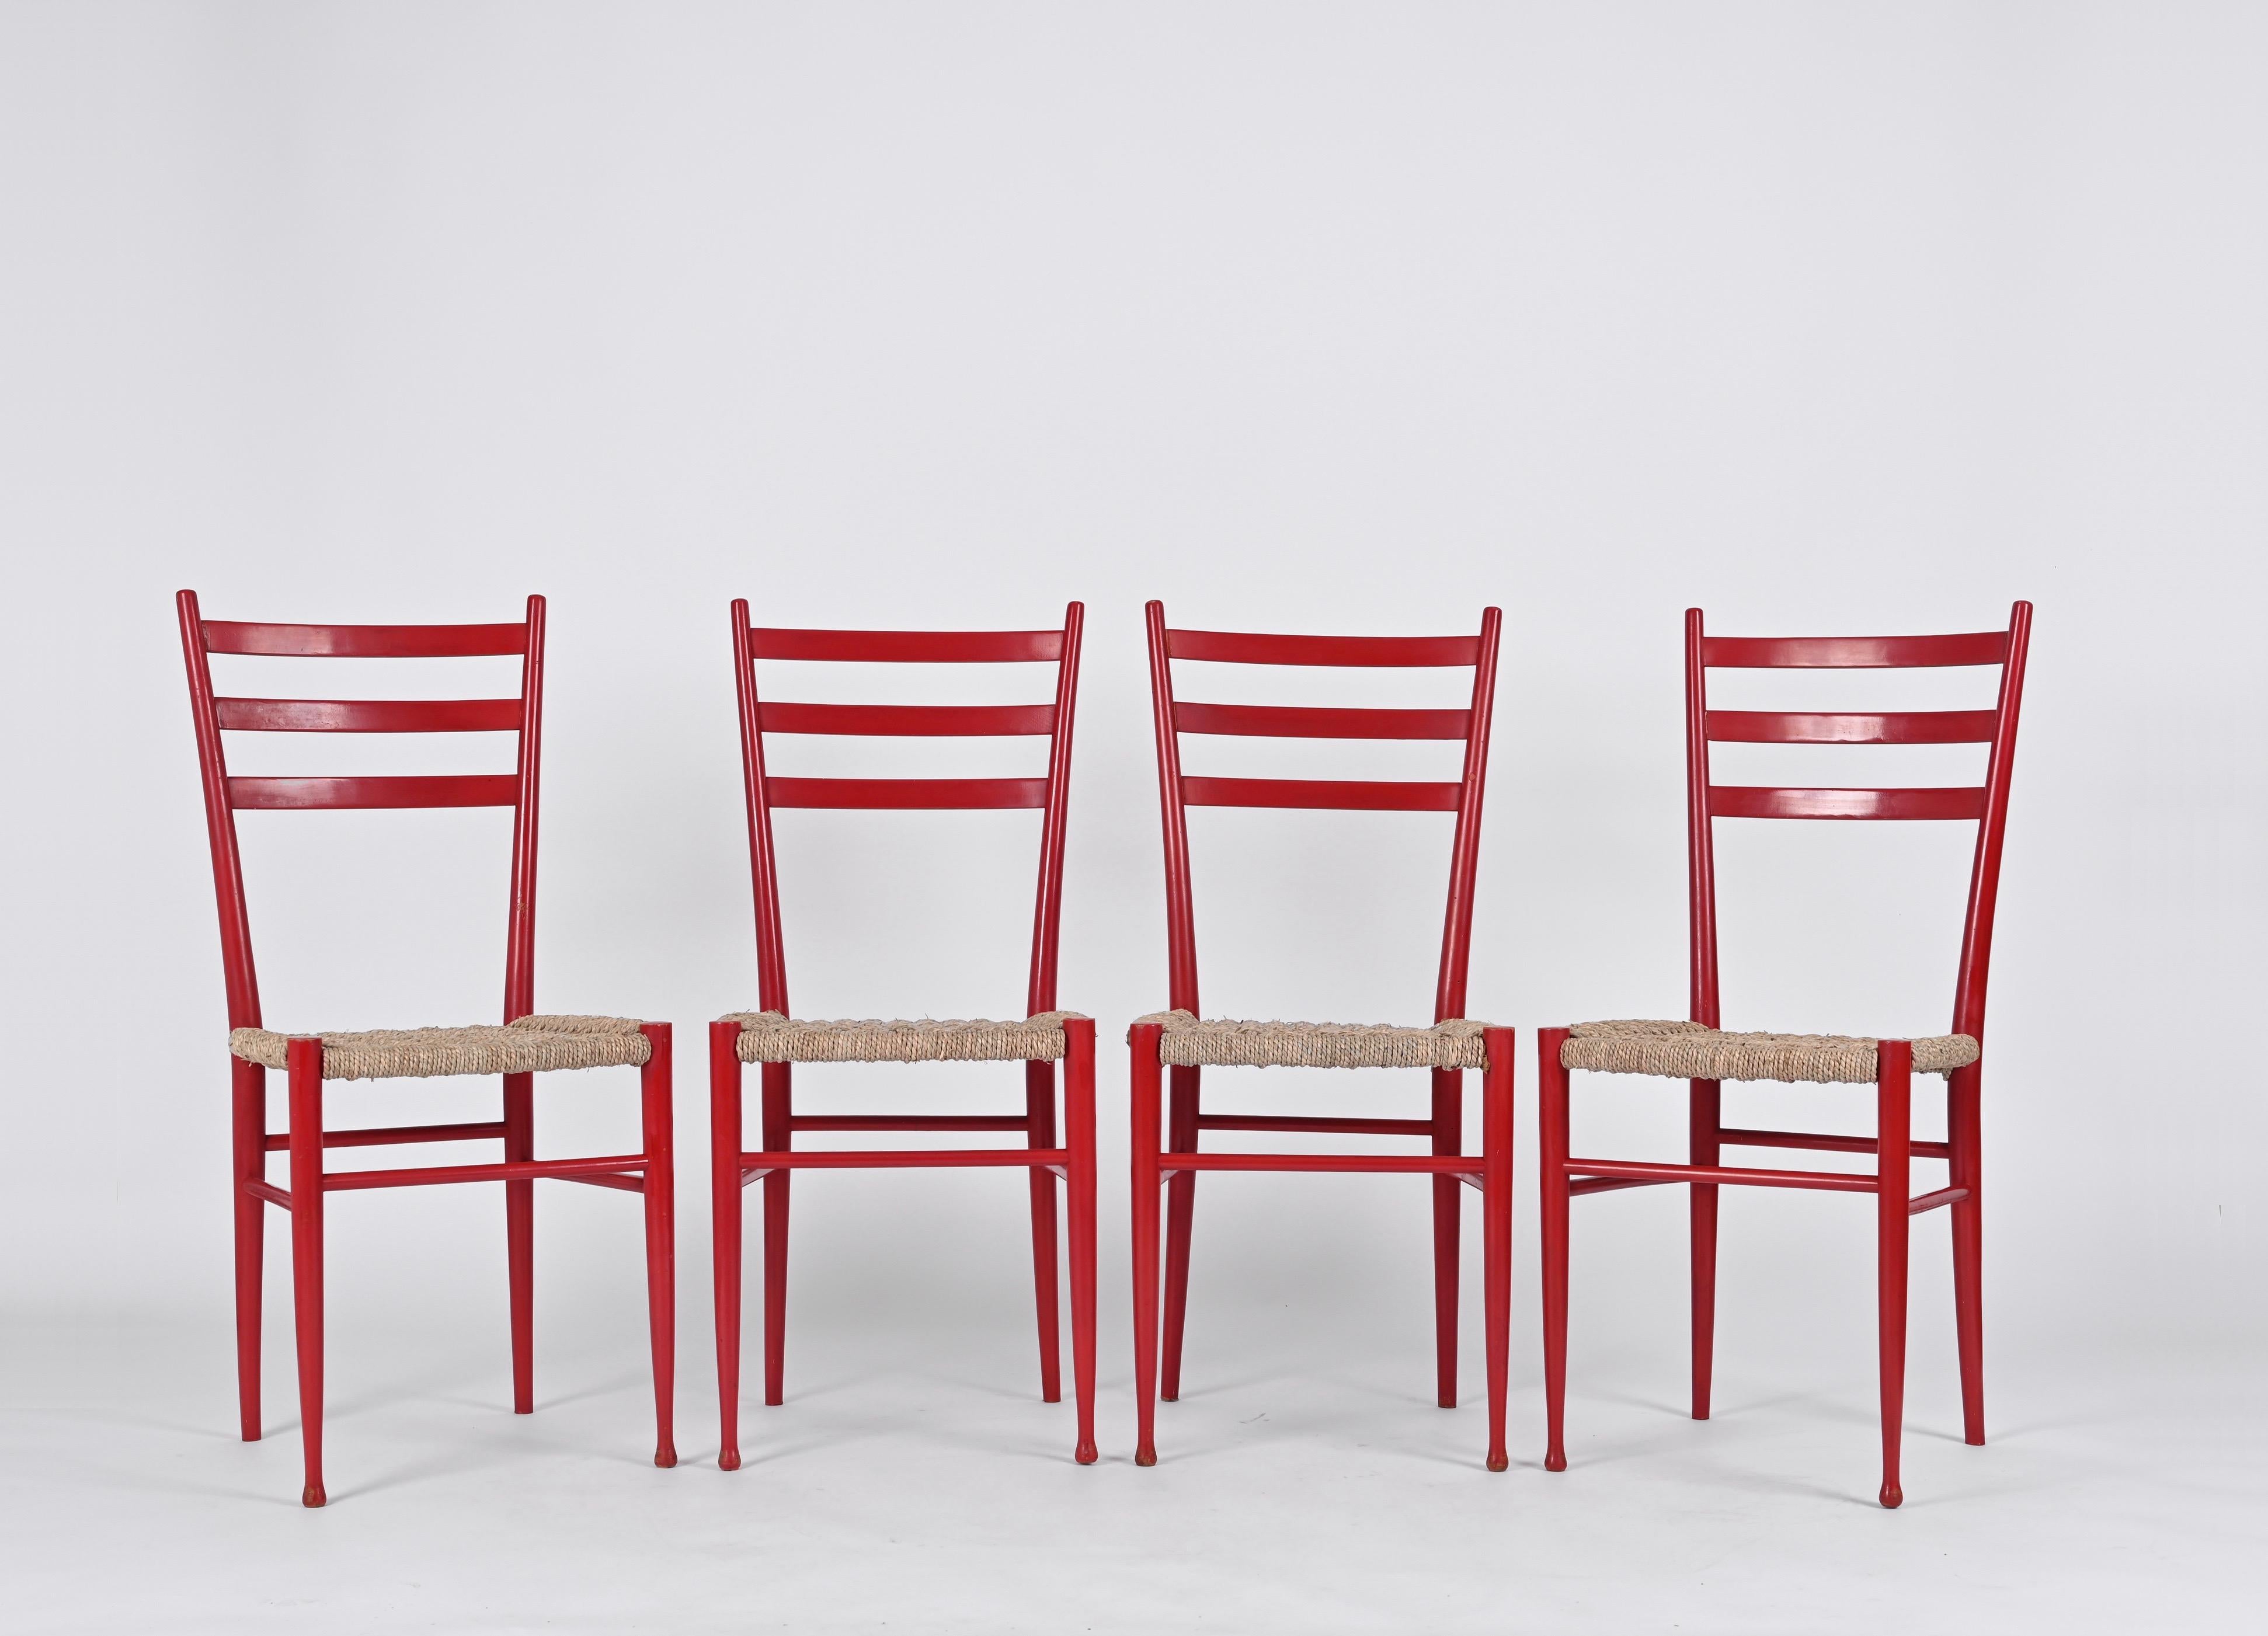 Beautiful Set of 4 Chiavarine chairs 3 slats model. These extremely light chairs were designed by the Levaggi brothers in the 1950s in Chiavari, Italy.

The chairs feature a structure in polished and red-stained beech wood with the seat in